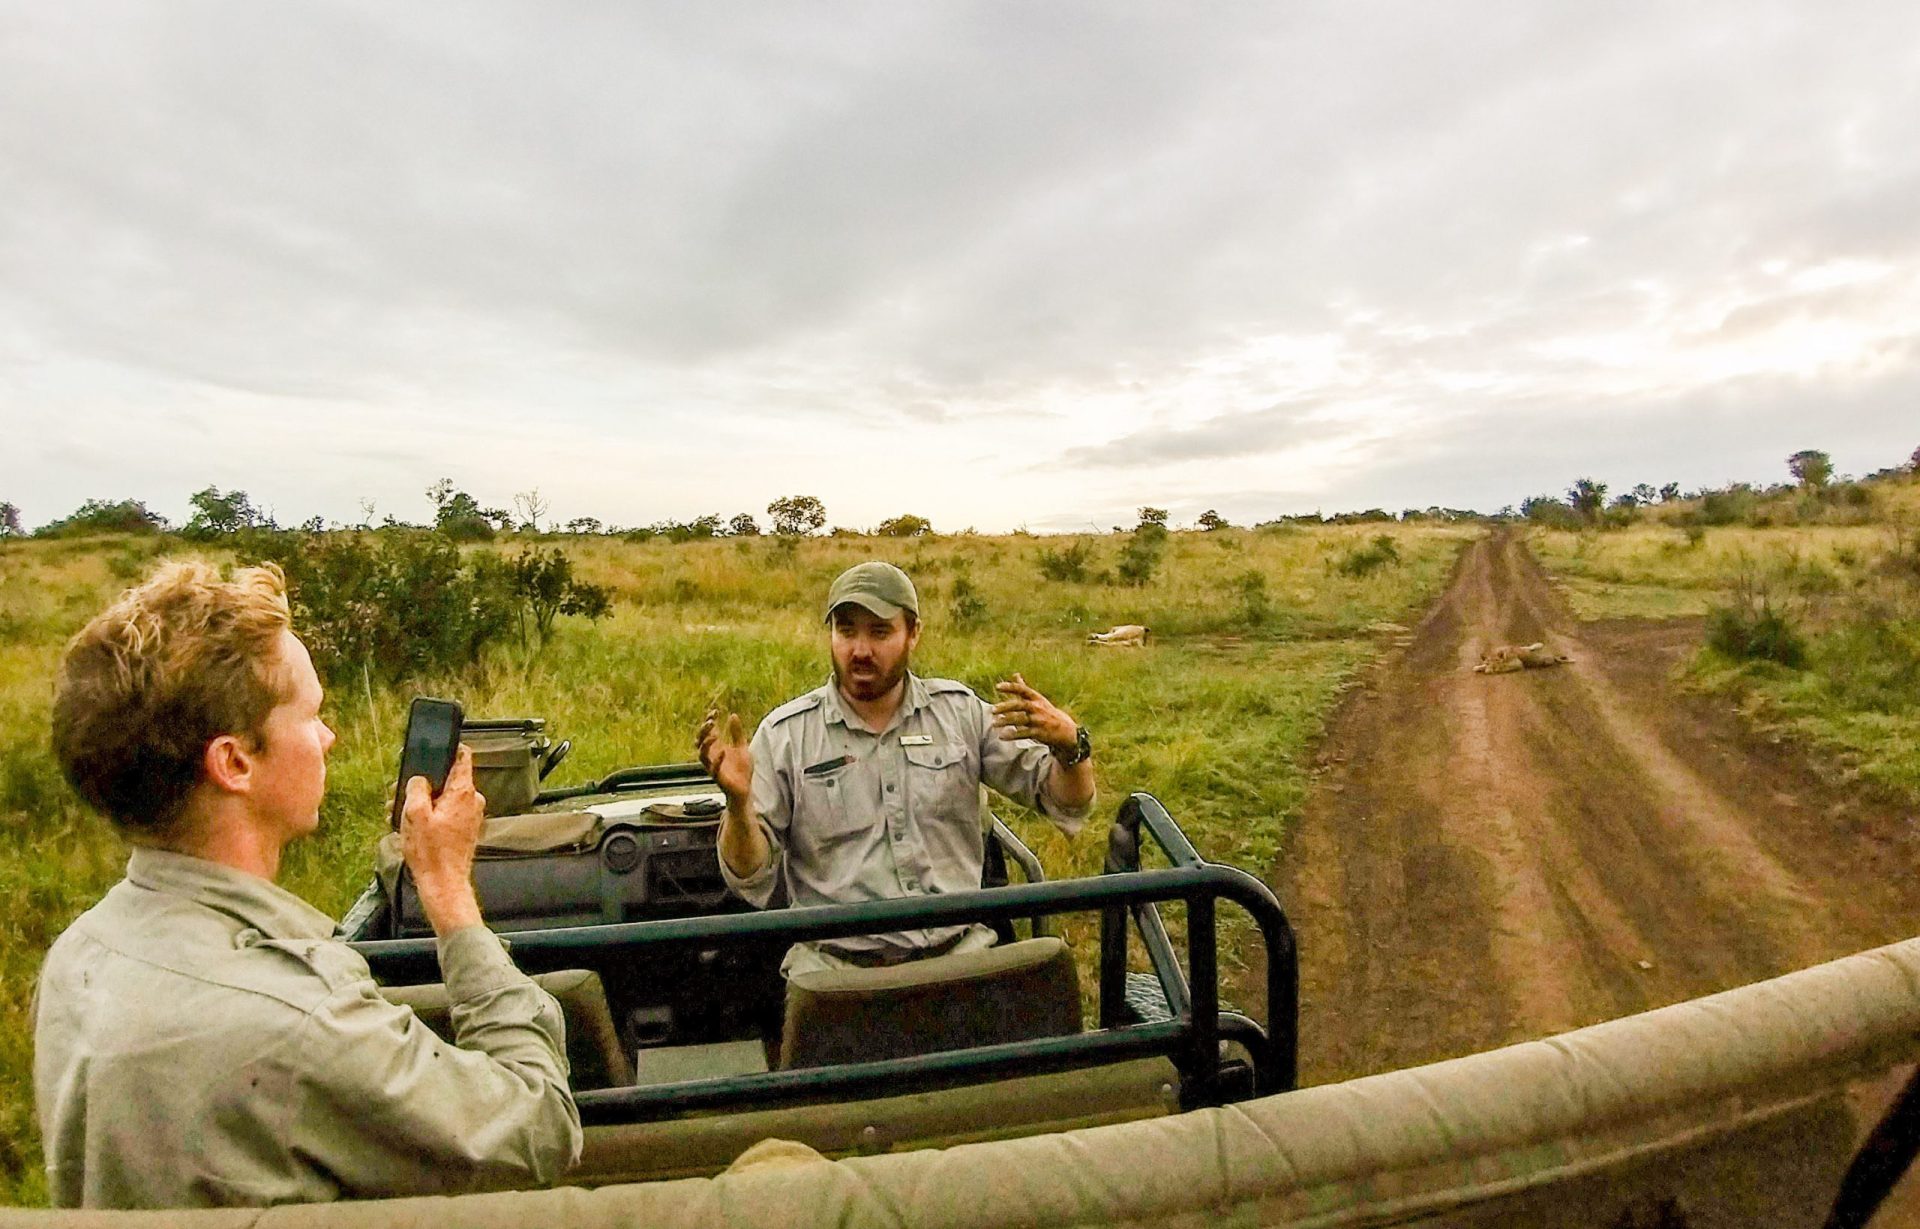 Now you can experience a 'once in a lifetime' safari from your sofa ...